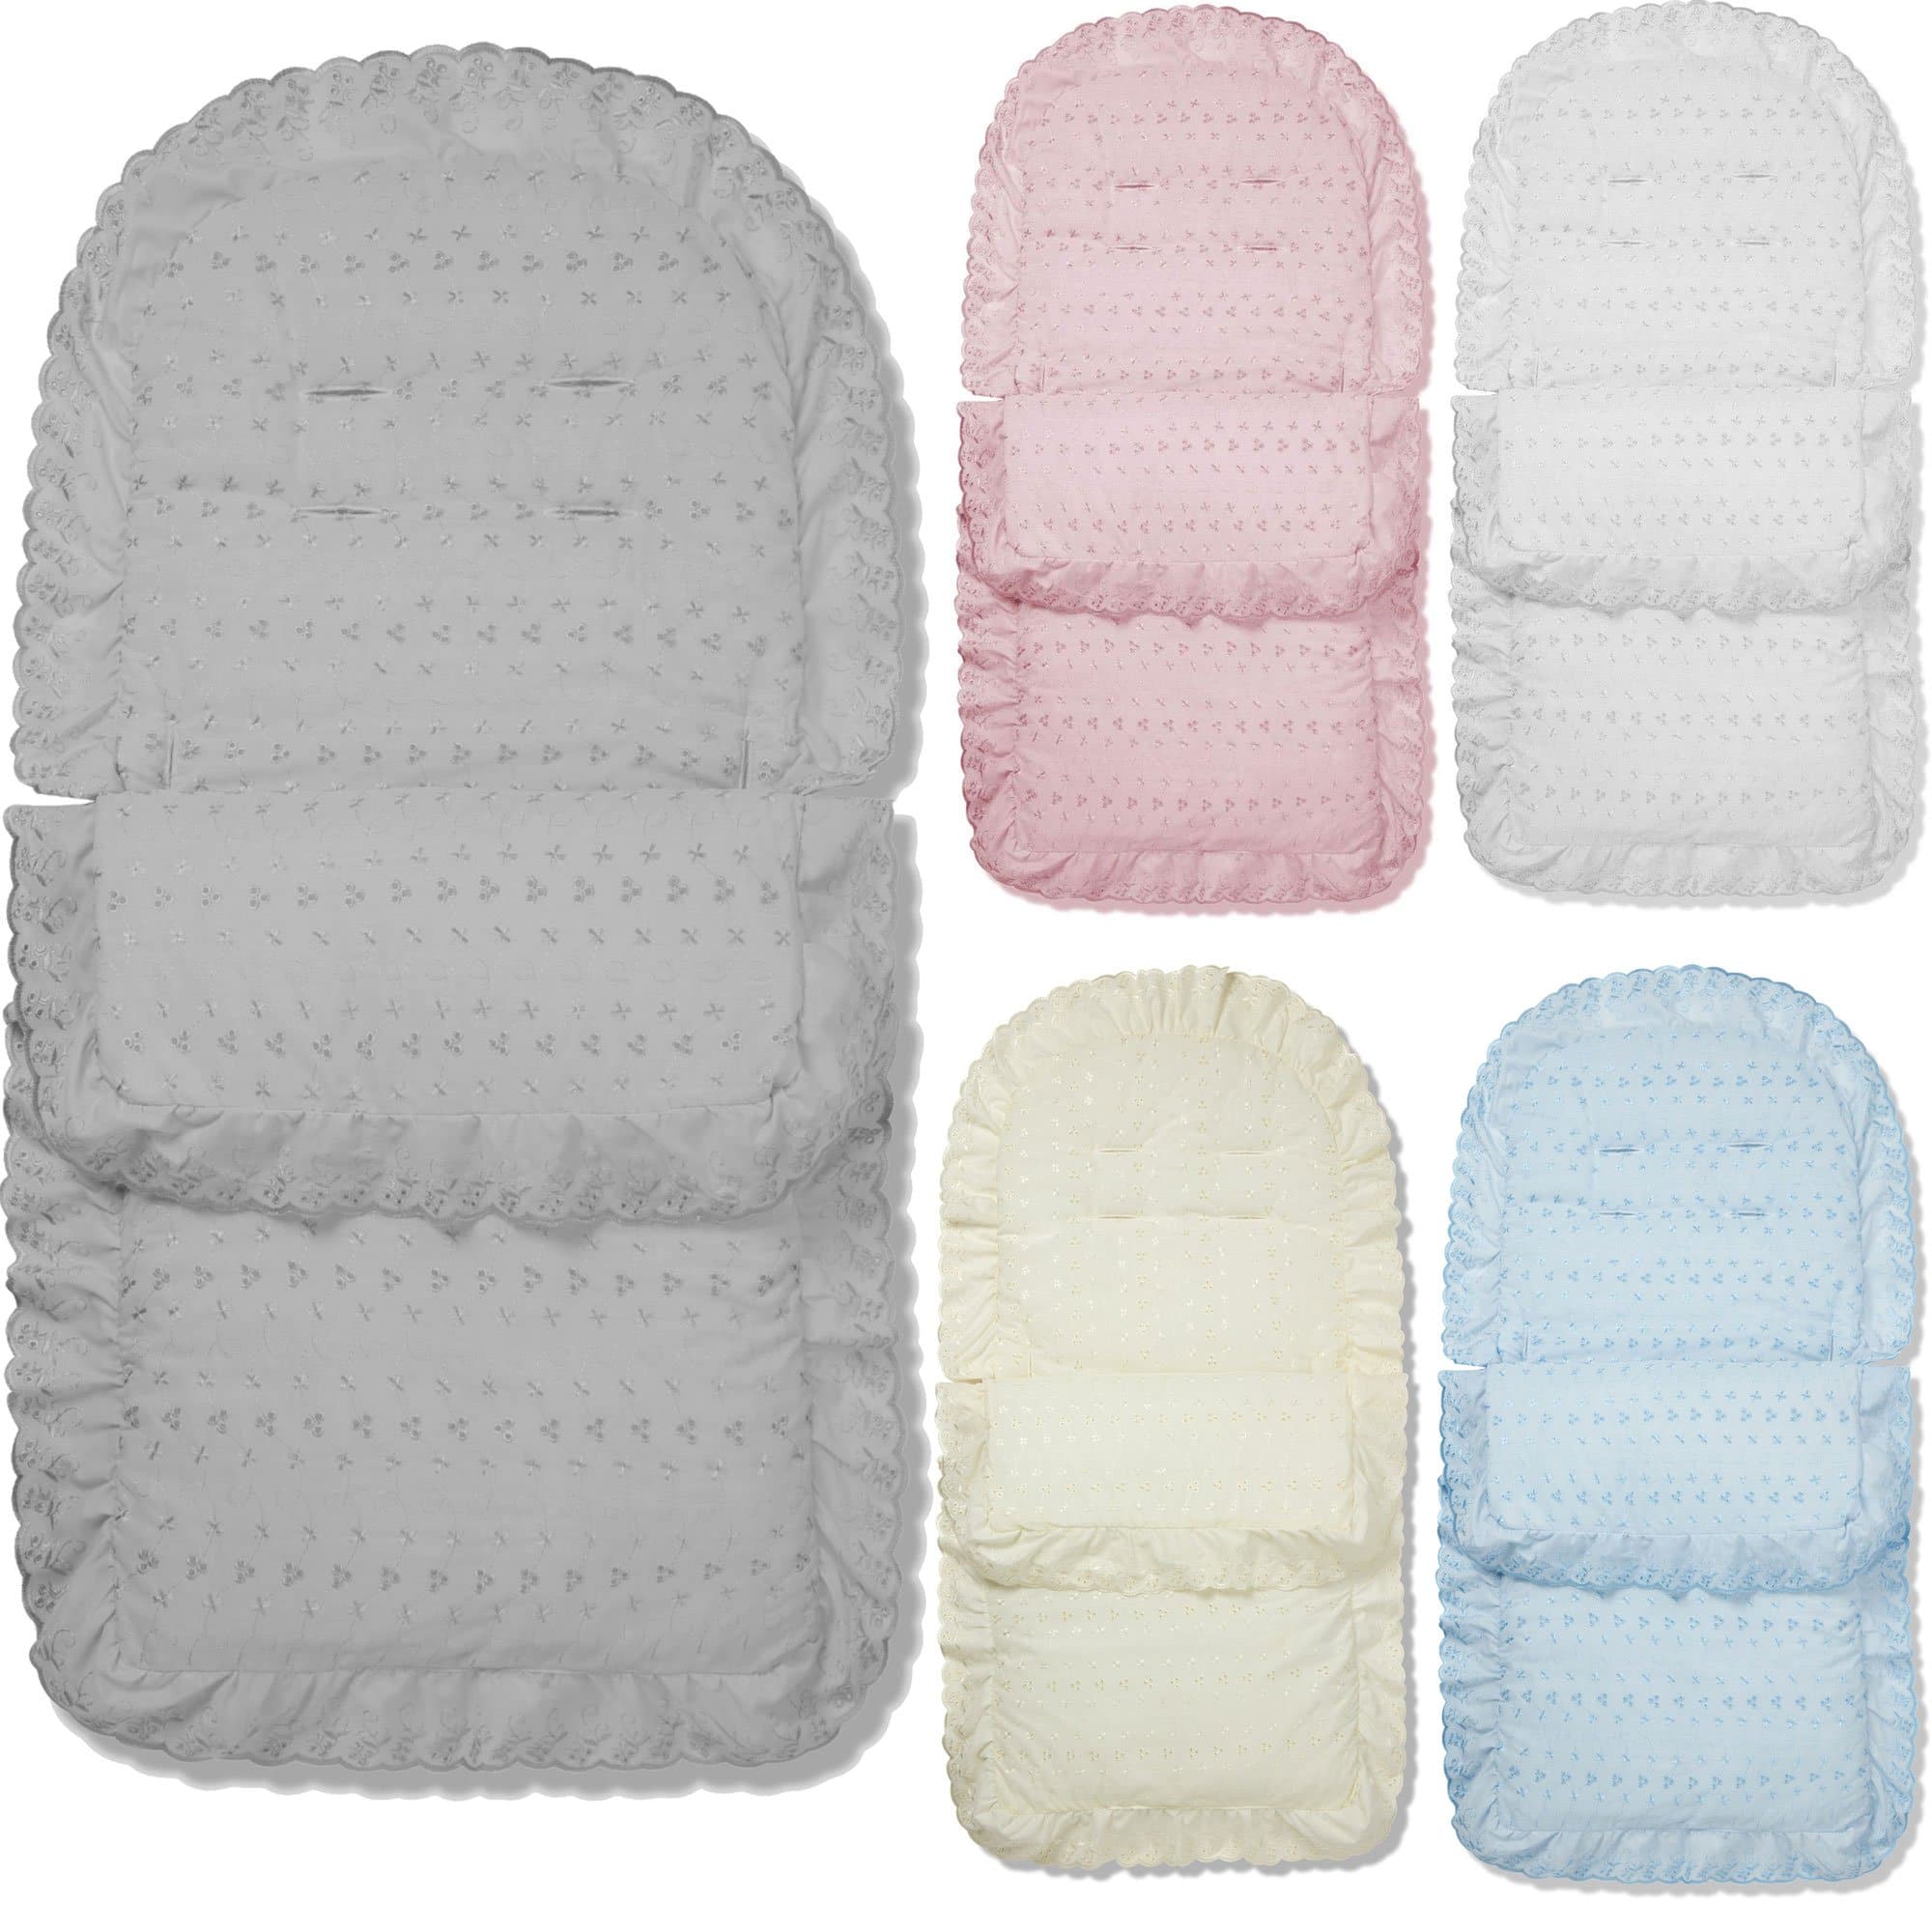 Universal Broderie Anglaise Pushchair Footmuff / Cosy Toes - Fits All Pushchairs / Prams And Buggies - For Your Little One